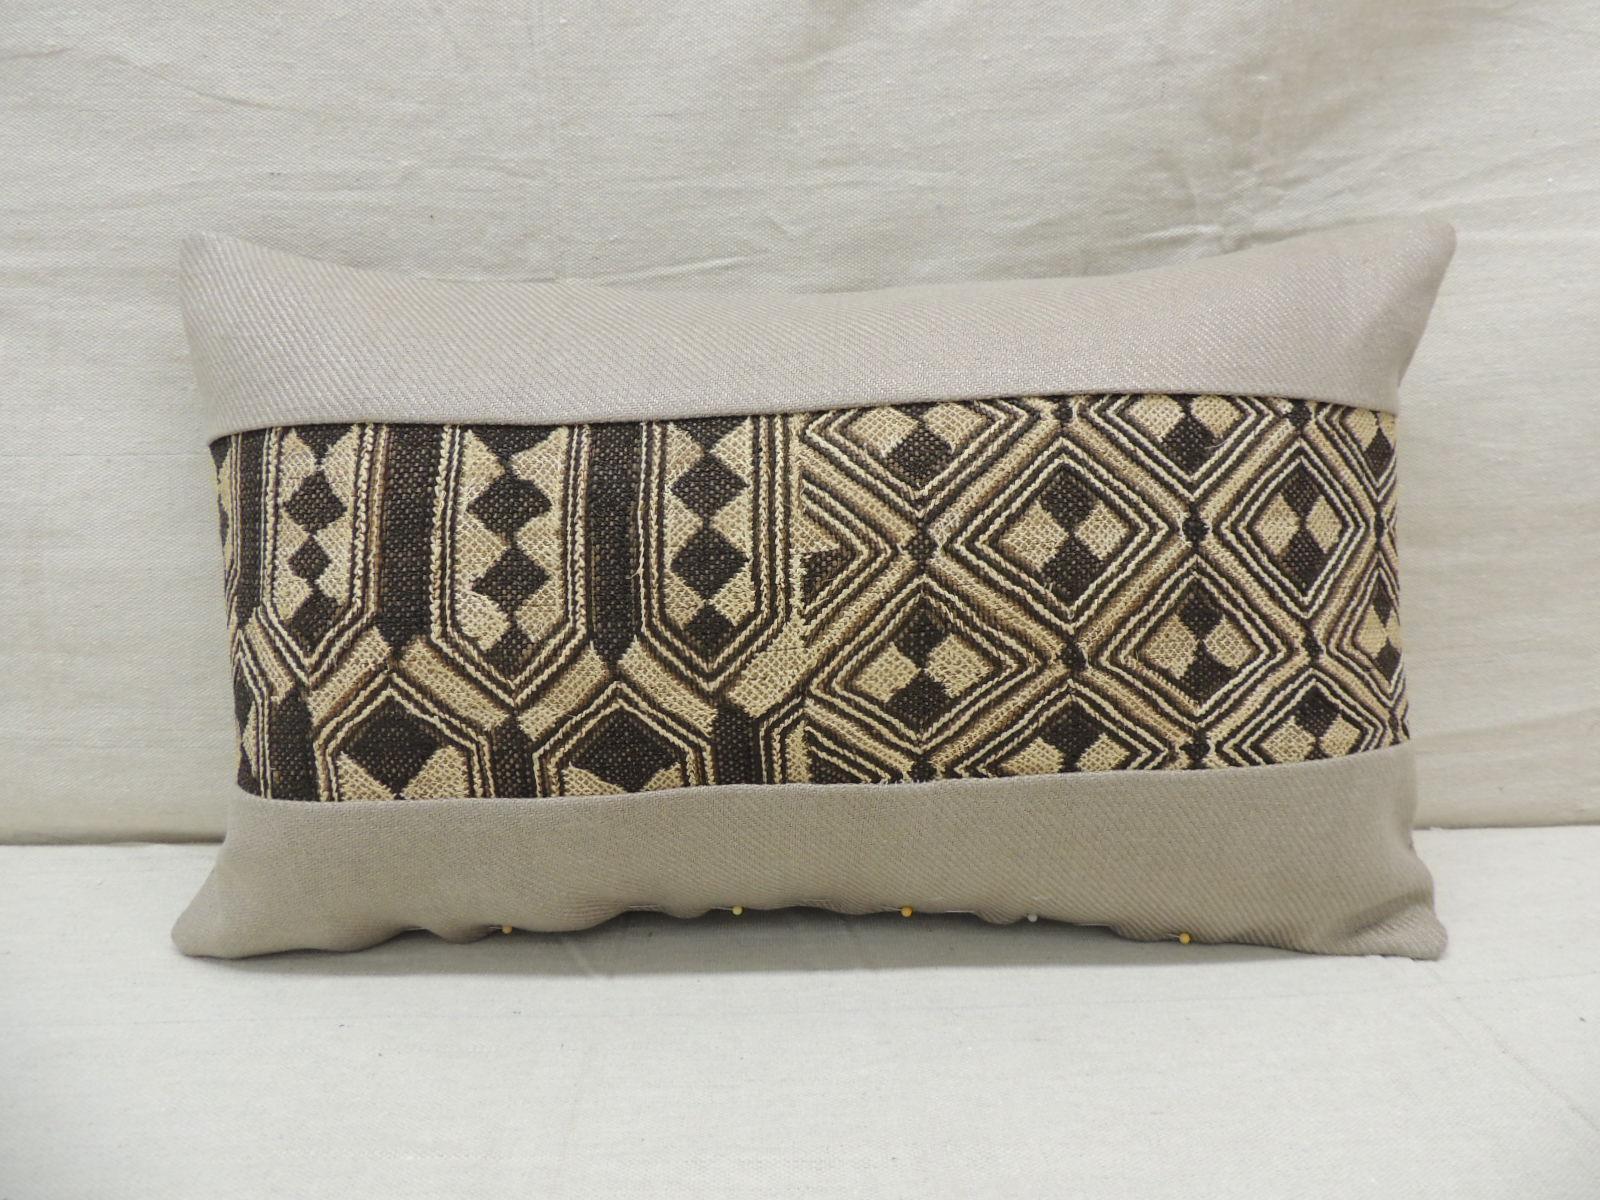 Vintage tan and black African Kuba lumbar decorative pillow
with weave woven grey linen frame and backing.
Decorative pillow handcrafted and designed in the USA. 
Closure by stitch (no zipper closure) with custom made pillow insert.
Size: 12